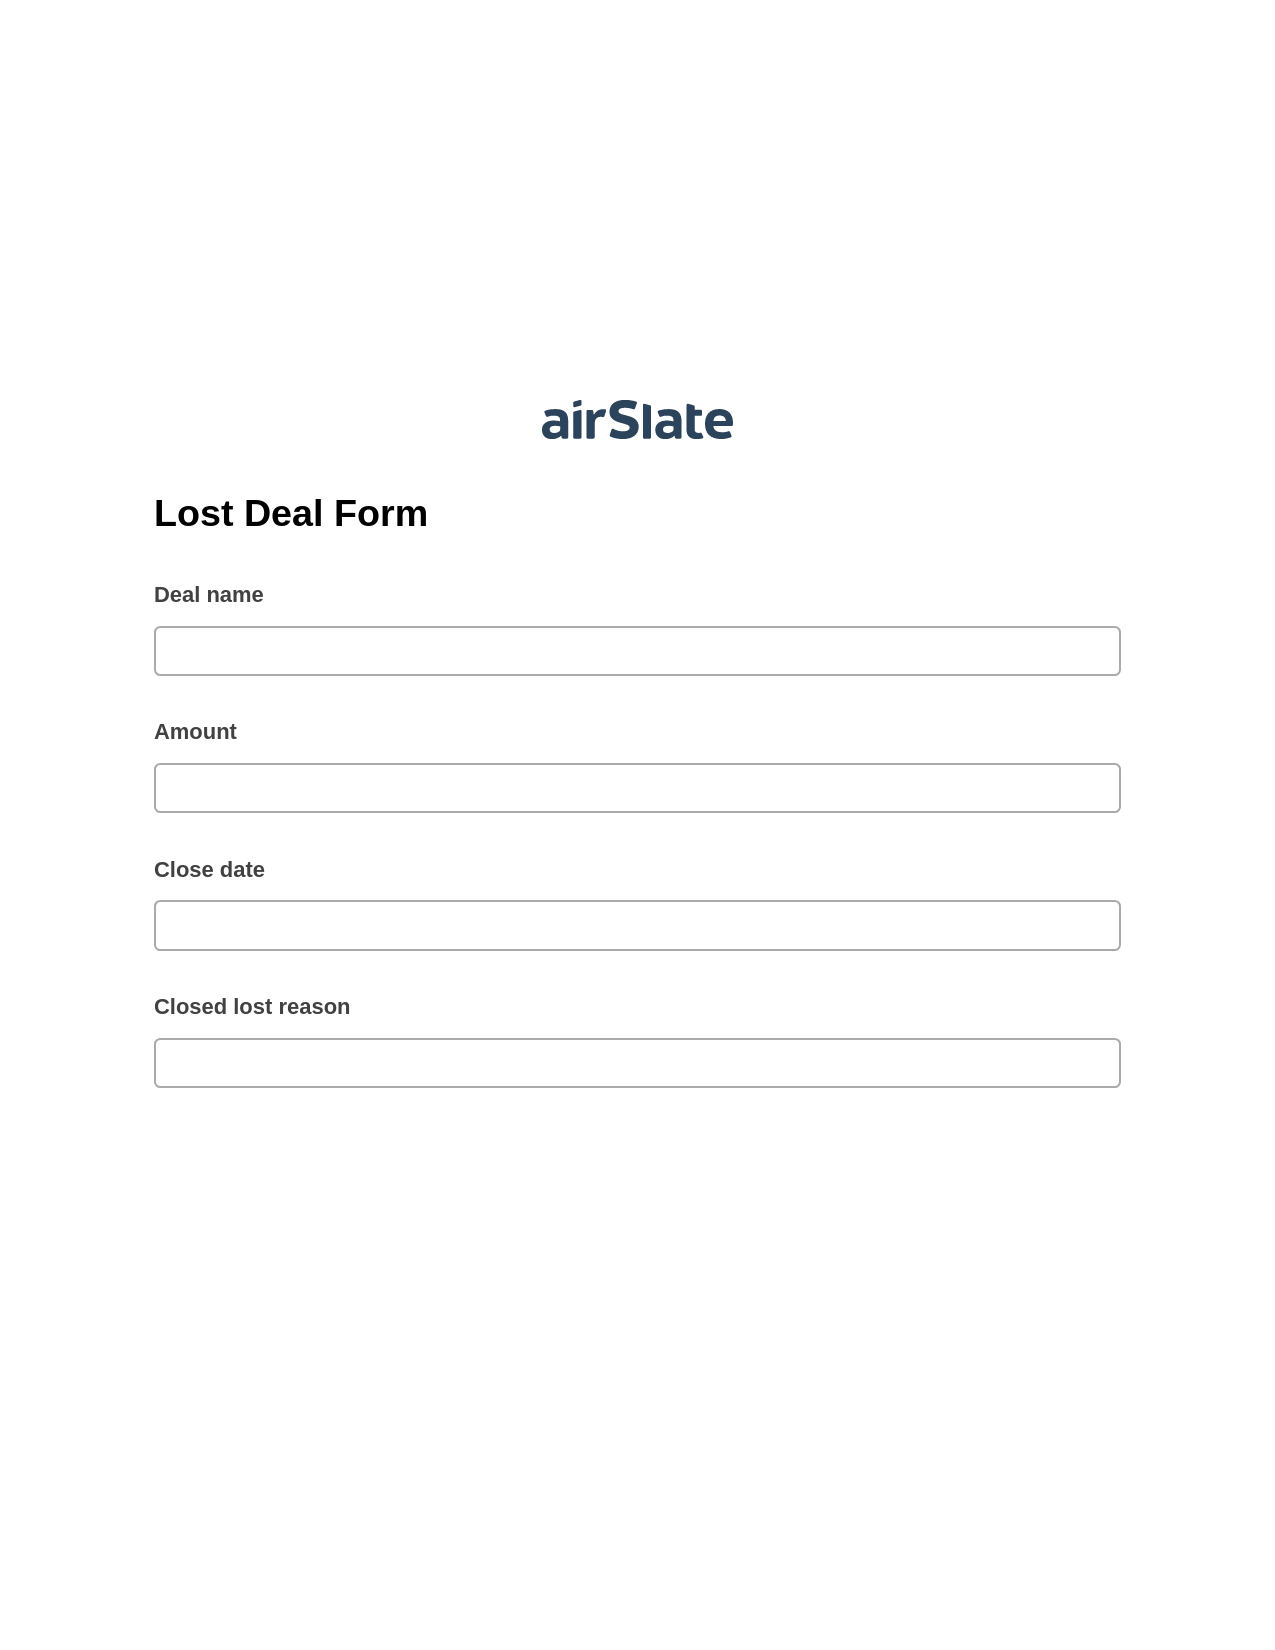 Multirole Lost Deal Form Pre-fill from CSV File Bot, Send a Slate to Salesforce Contact Bot, Archive to SharePoint Folder Bot